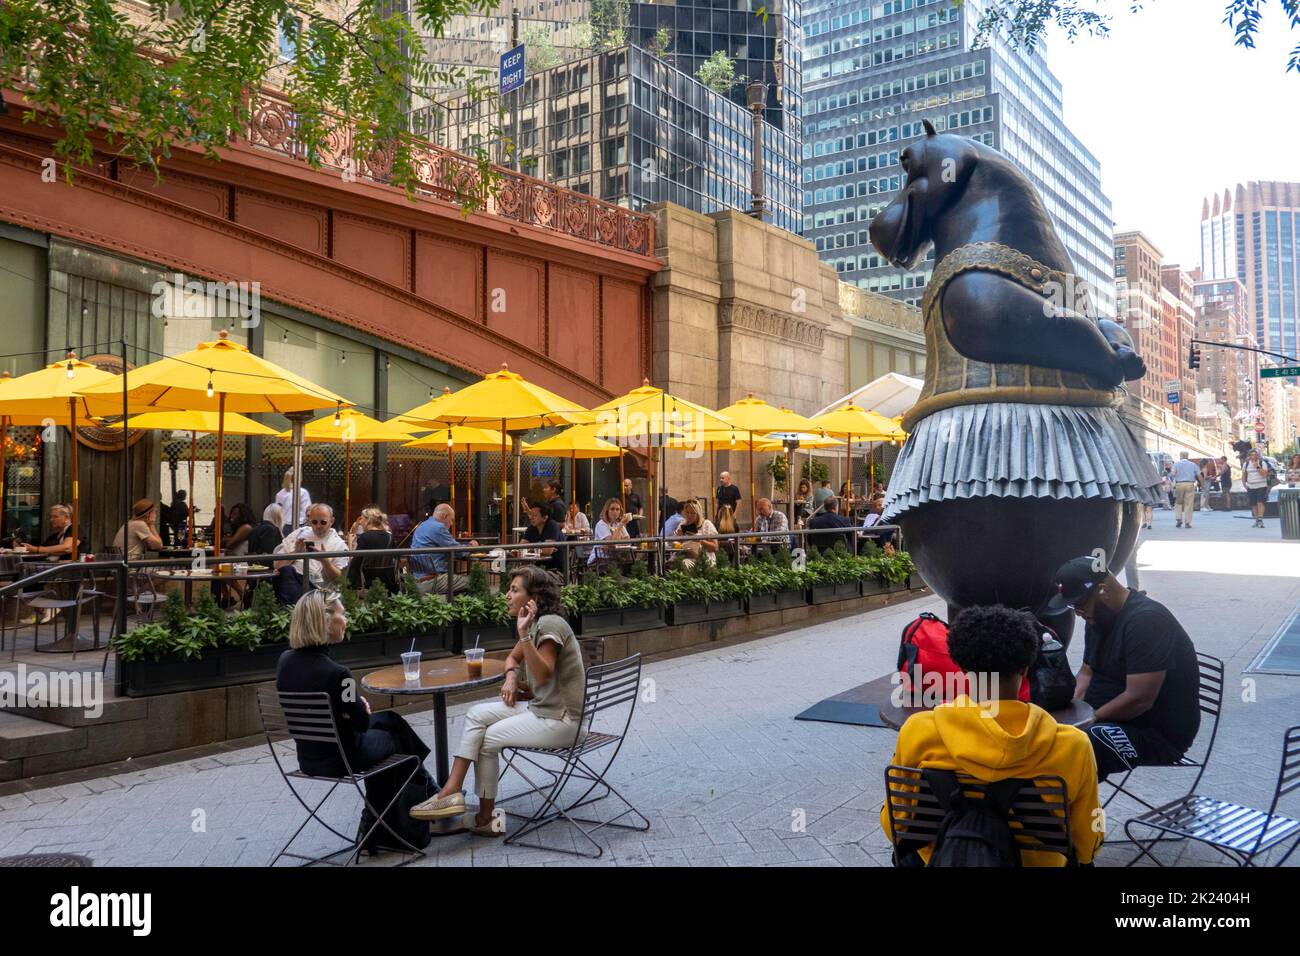 Bjorn Okholm Skaarup's whimsical bronze statues are on display in Pershing Square in front of Grand Central Terminal, New York City, USA  2022 Stock Photo